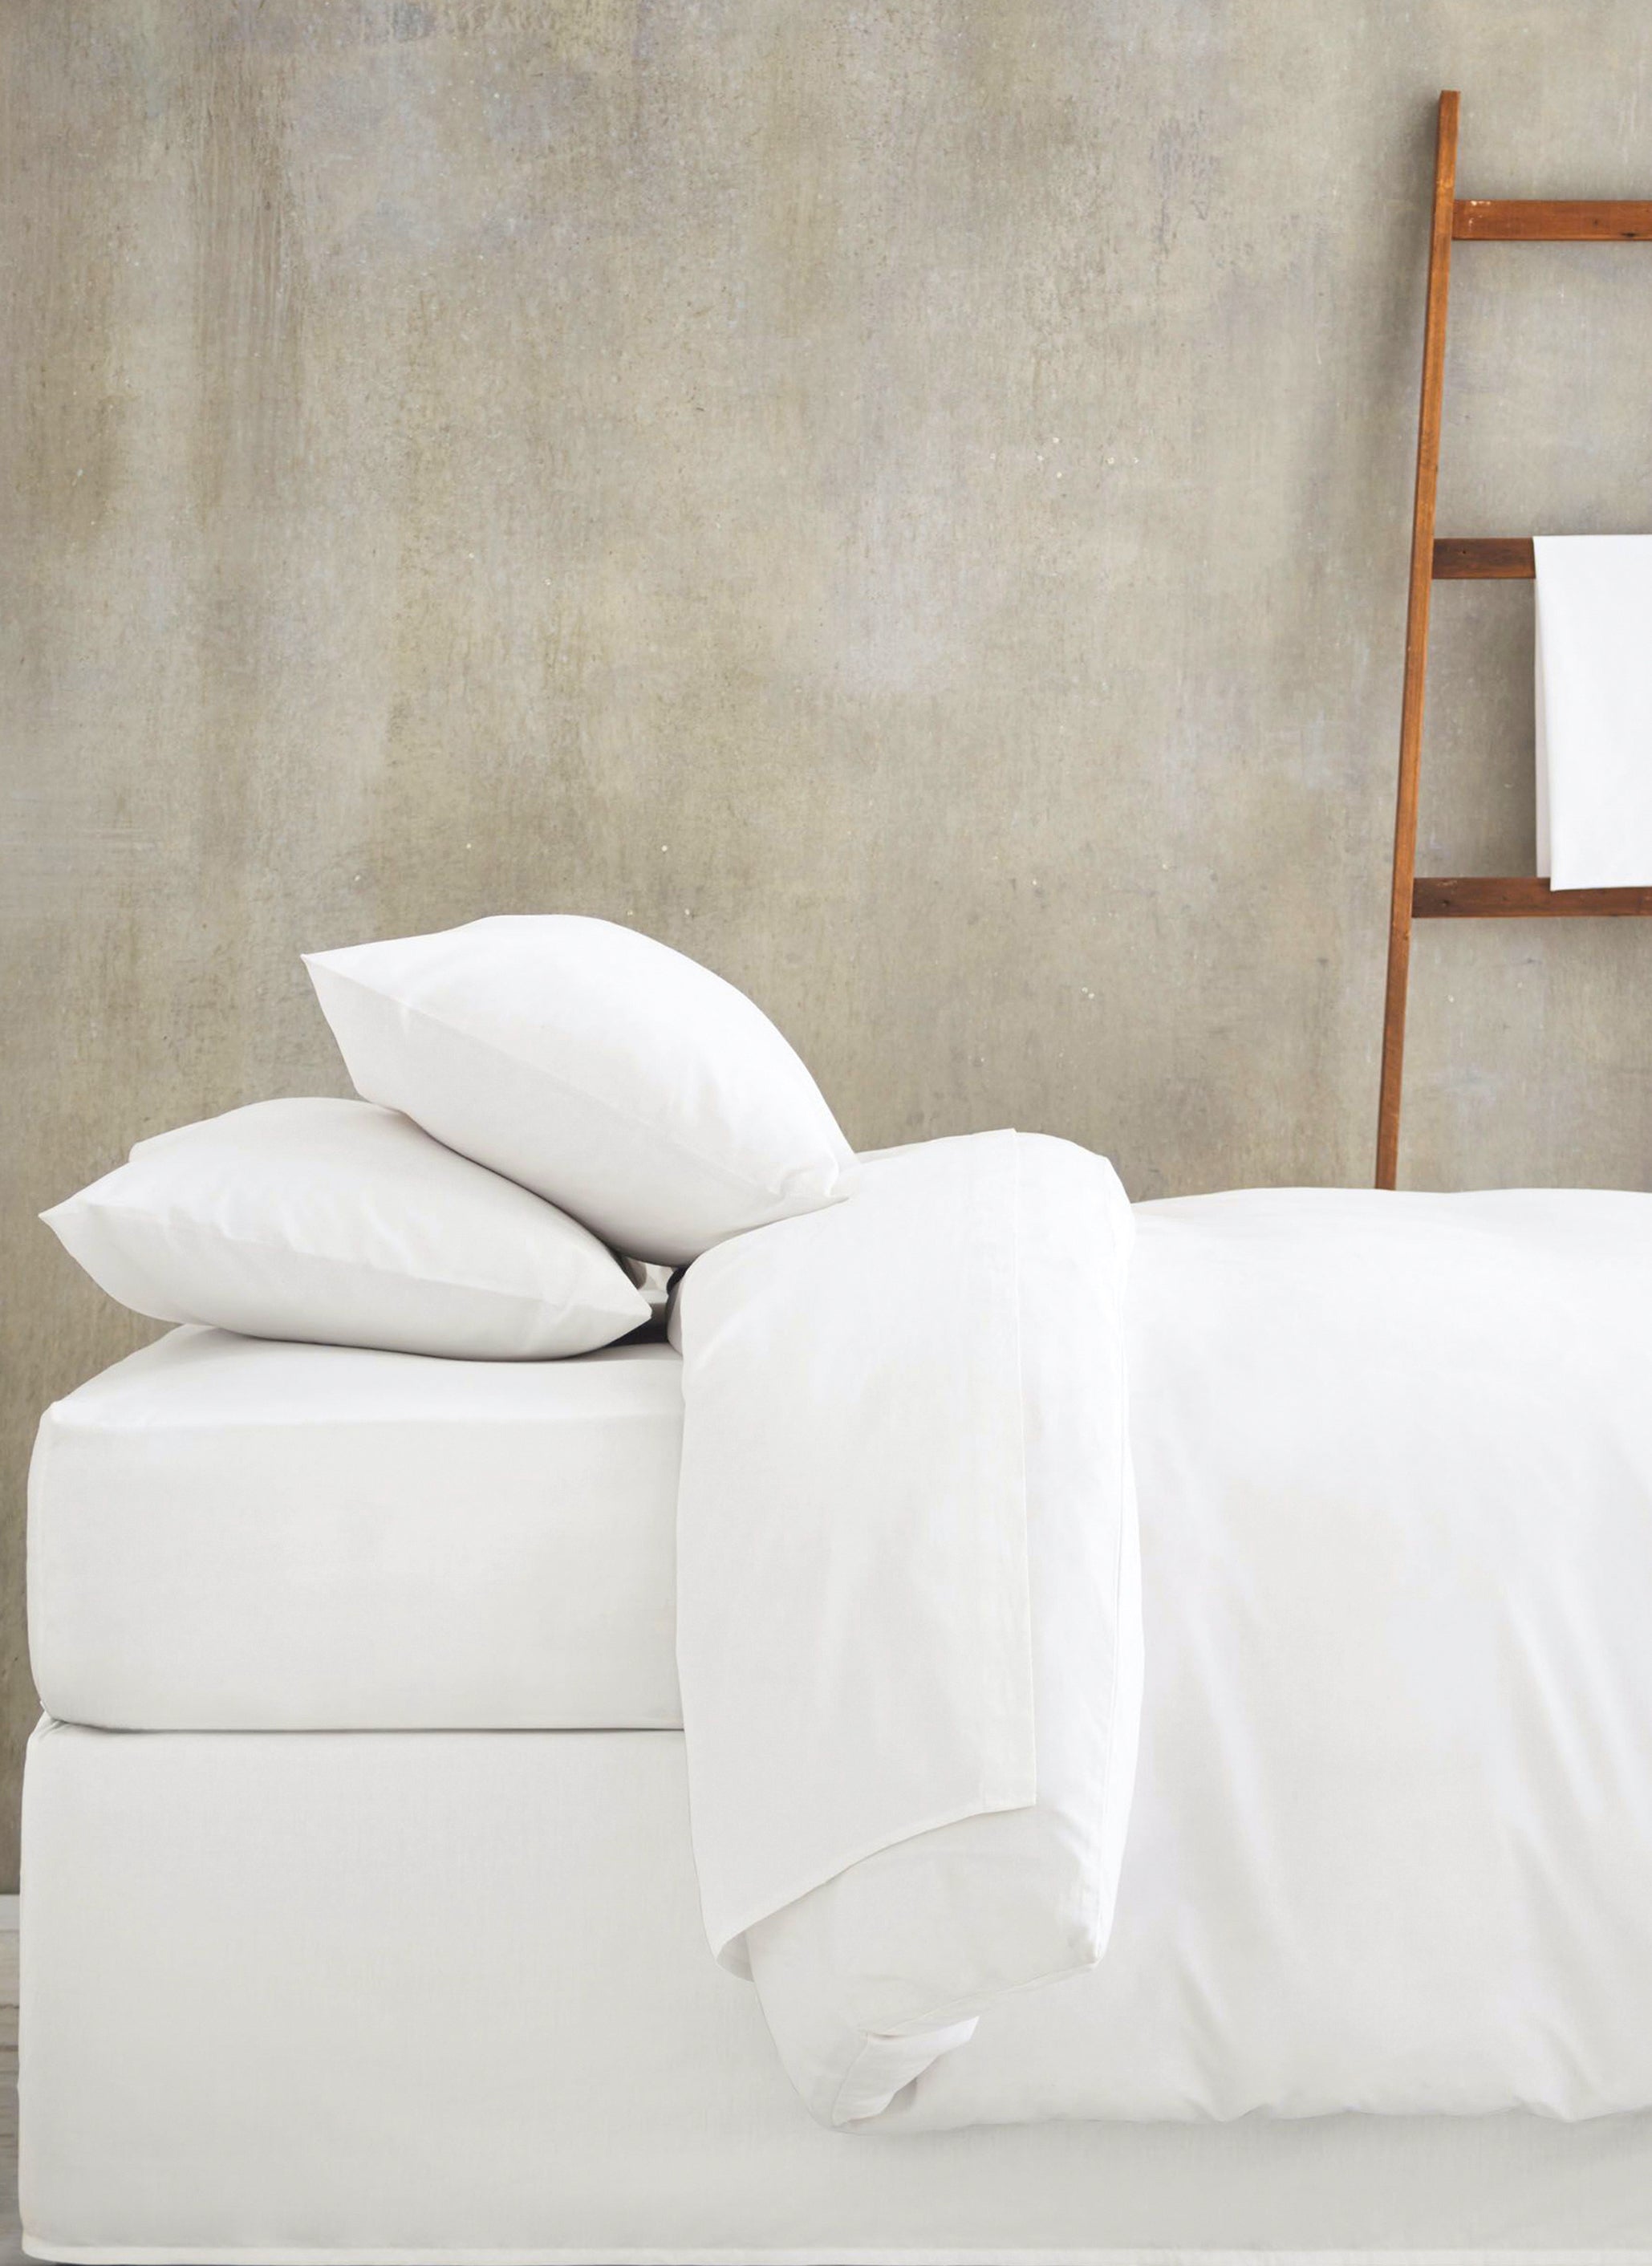 white bed linen on mattress and base set with white towel on towel ladder in background